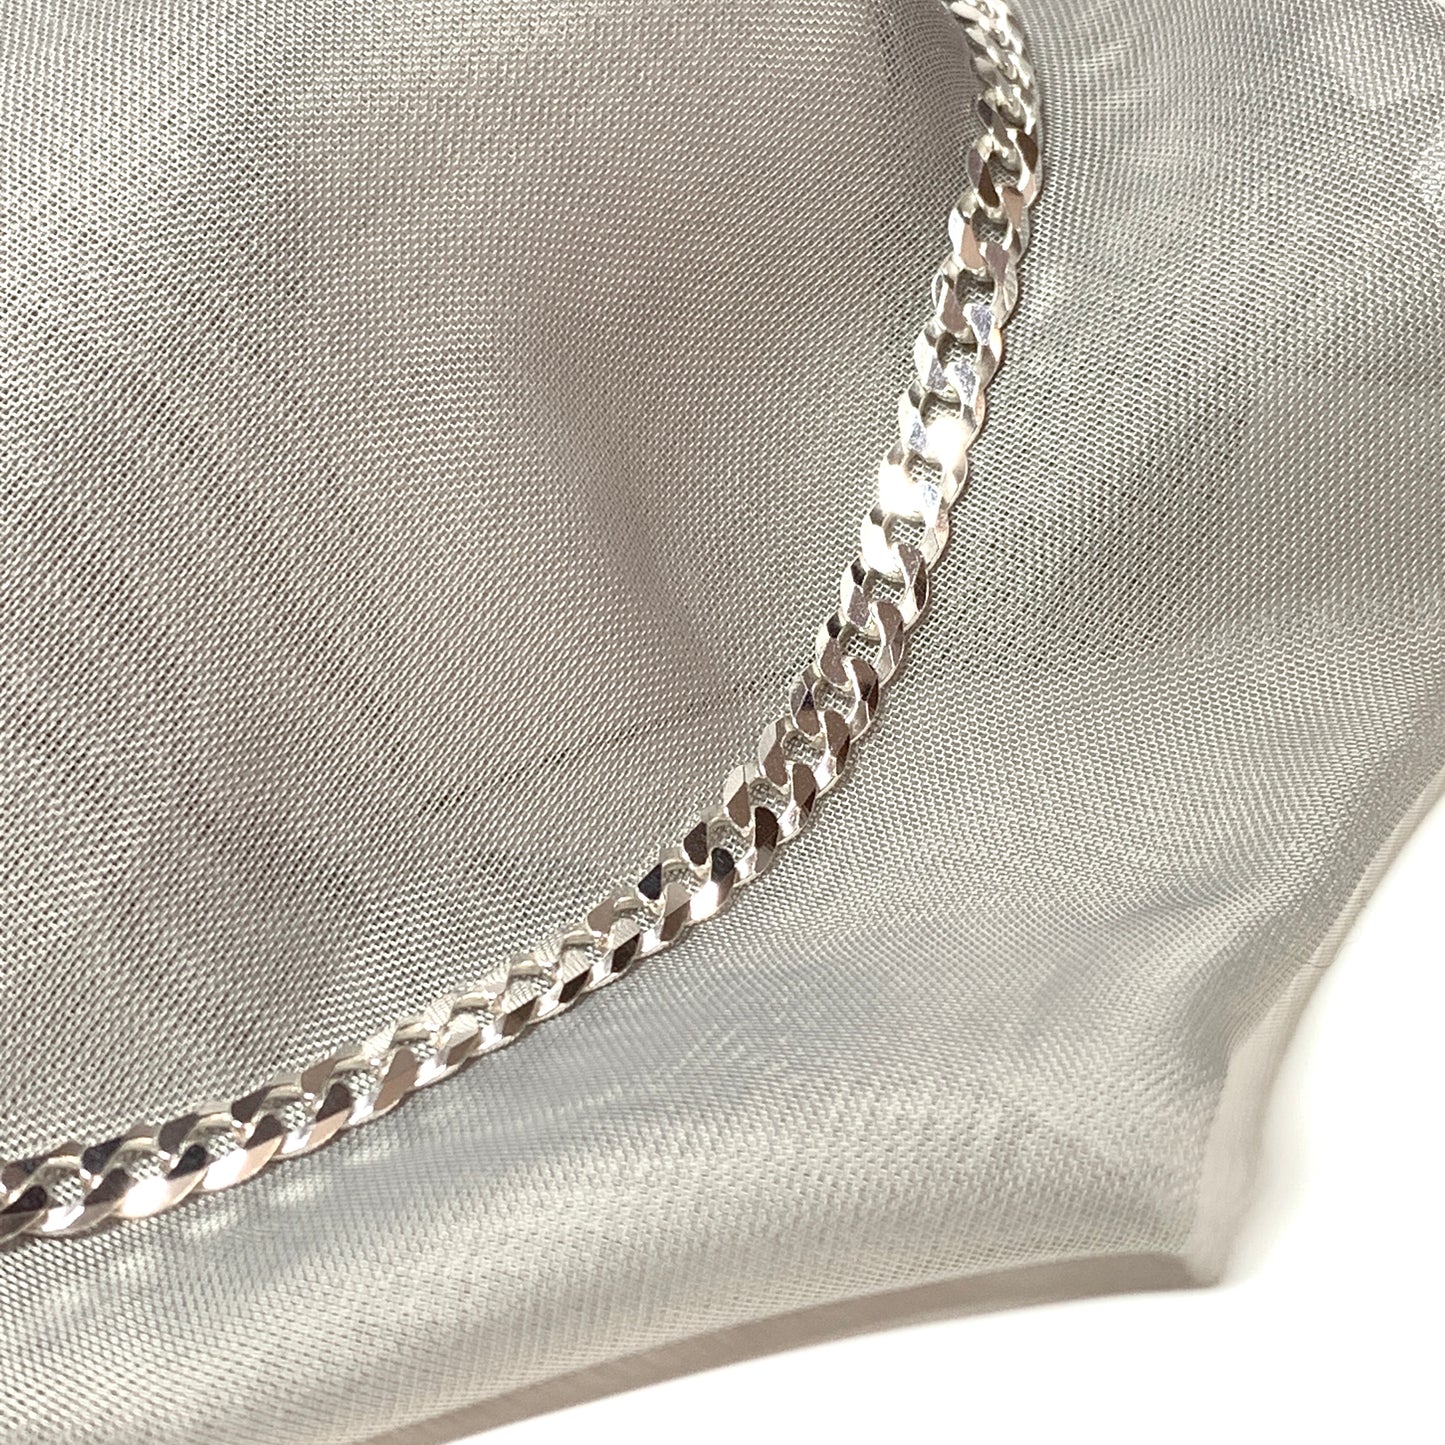 Mens solid sterling silver curb necklace chain